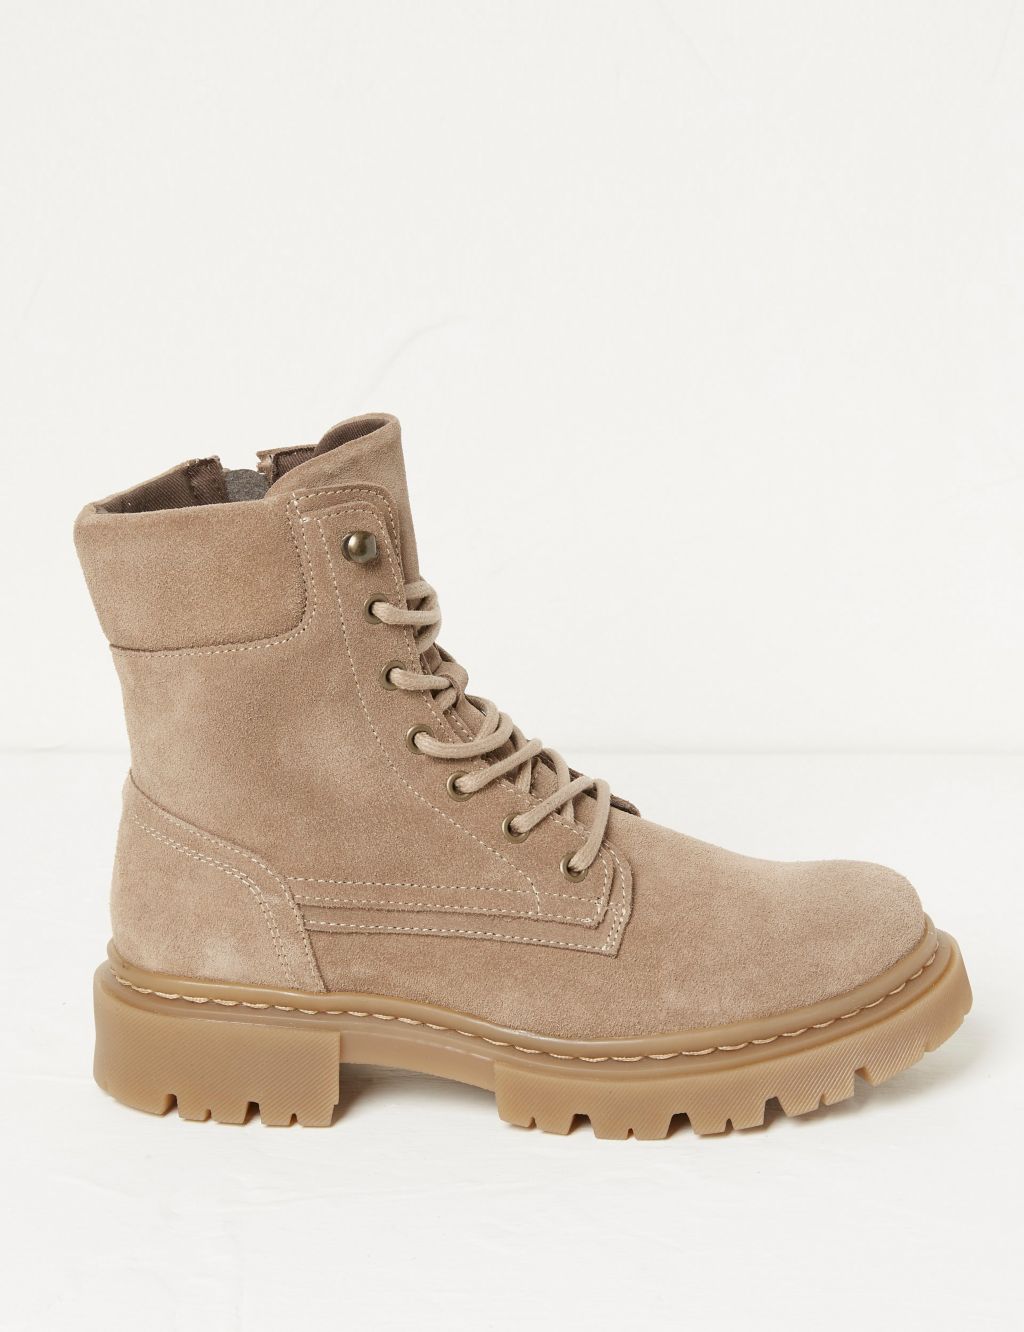 Suede Hiker Ankle Boots image 1